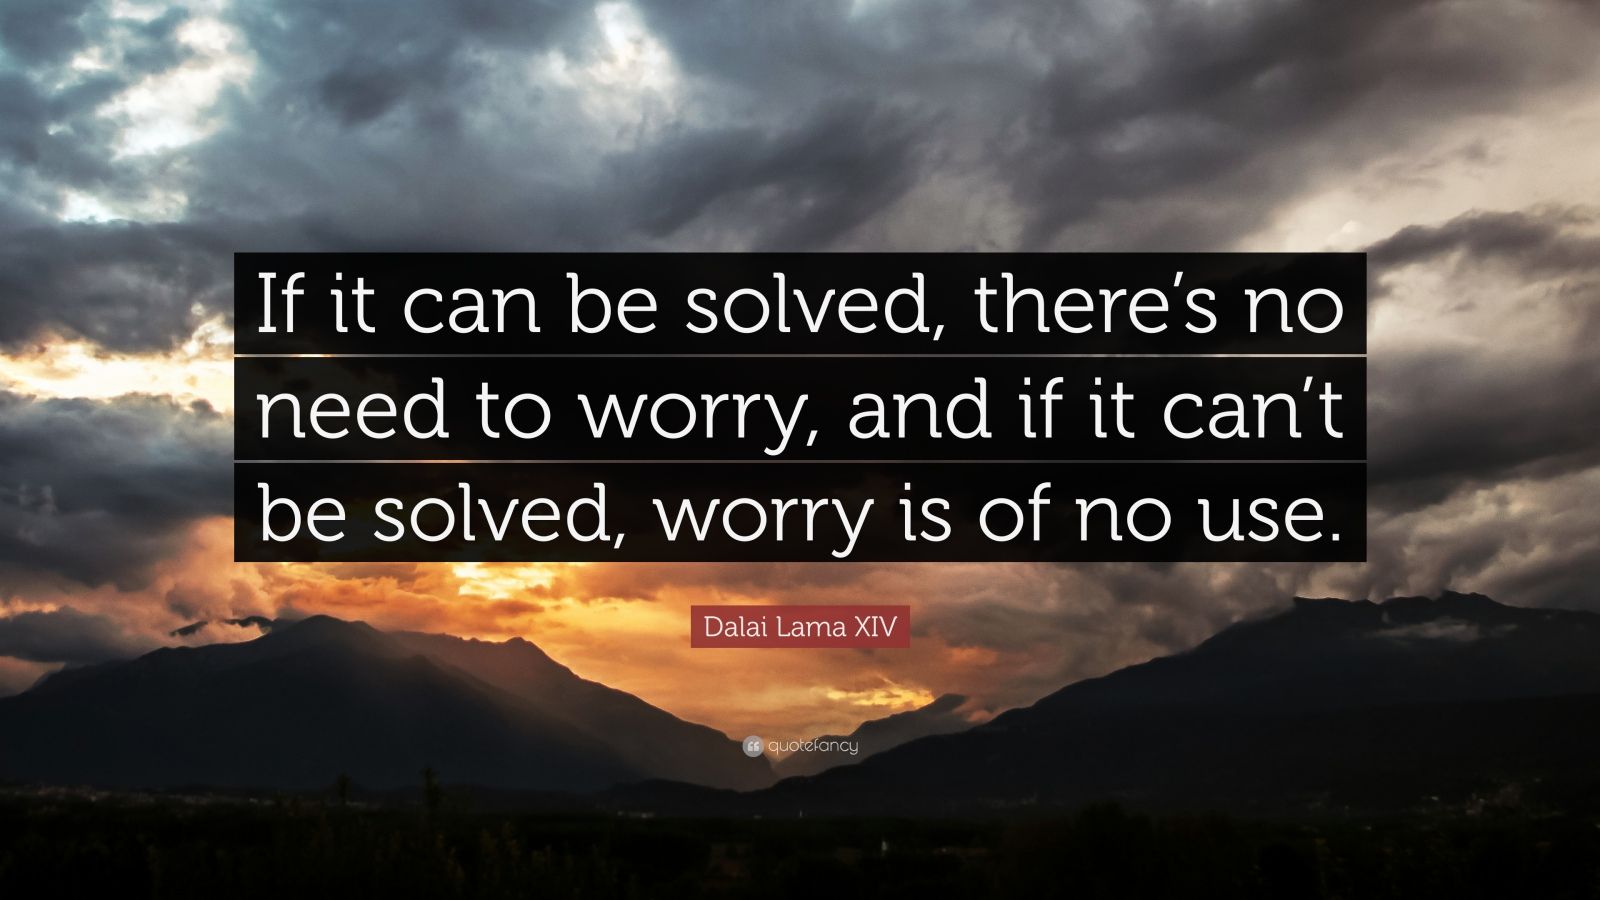 Dalai Lama XIV Quote: “If it can be solved, there’s no need to worry